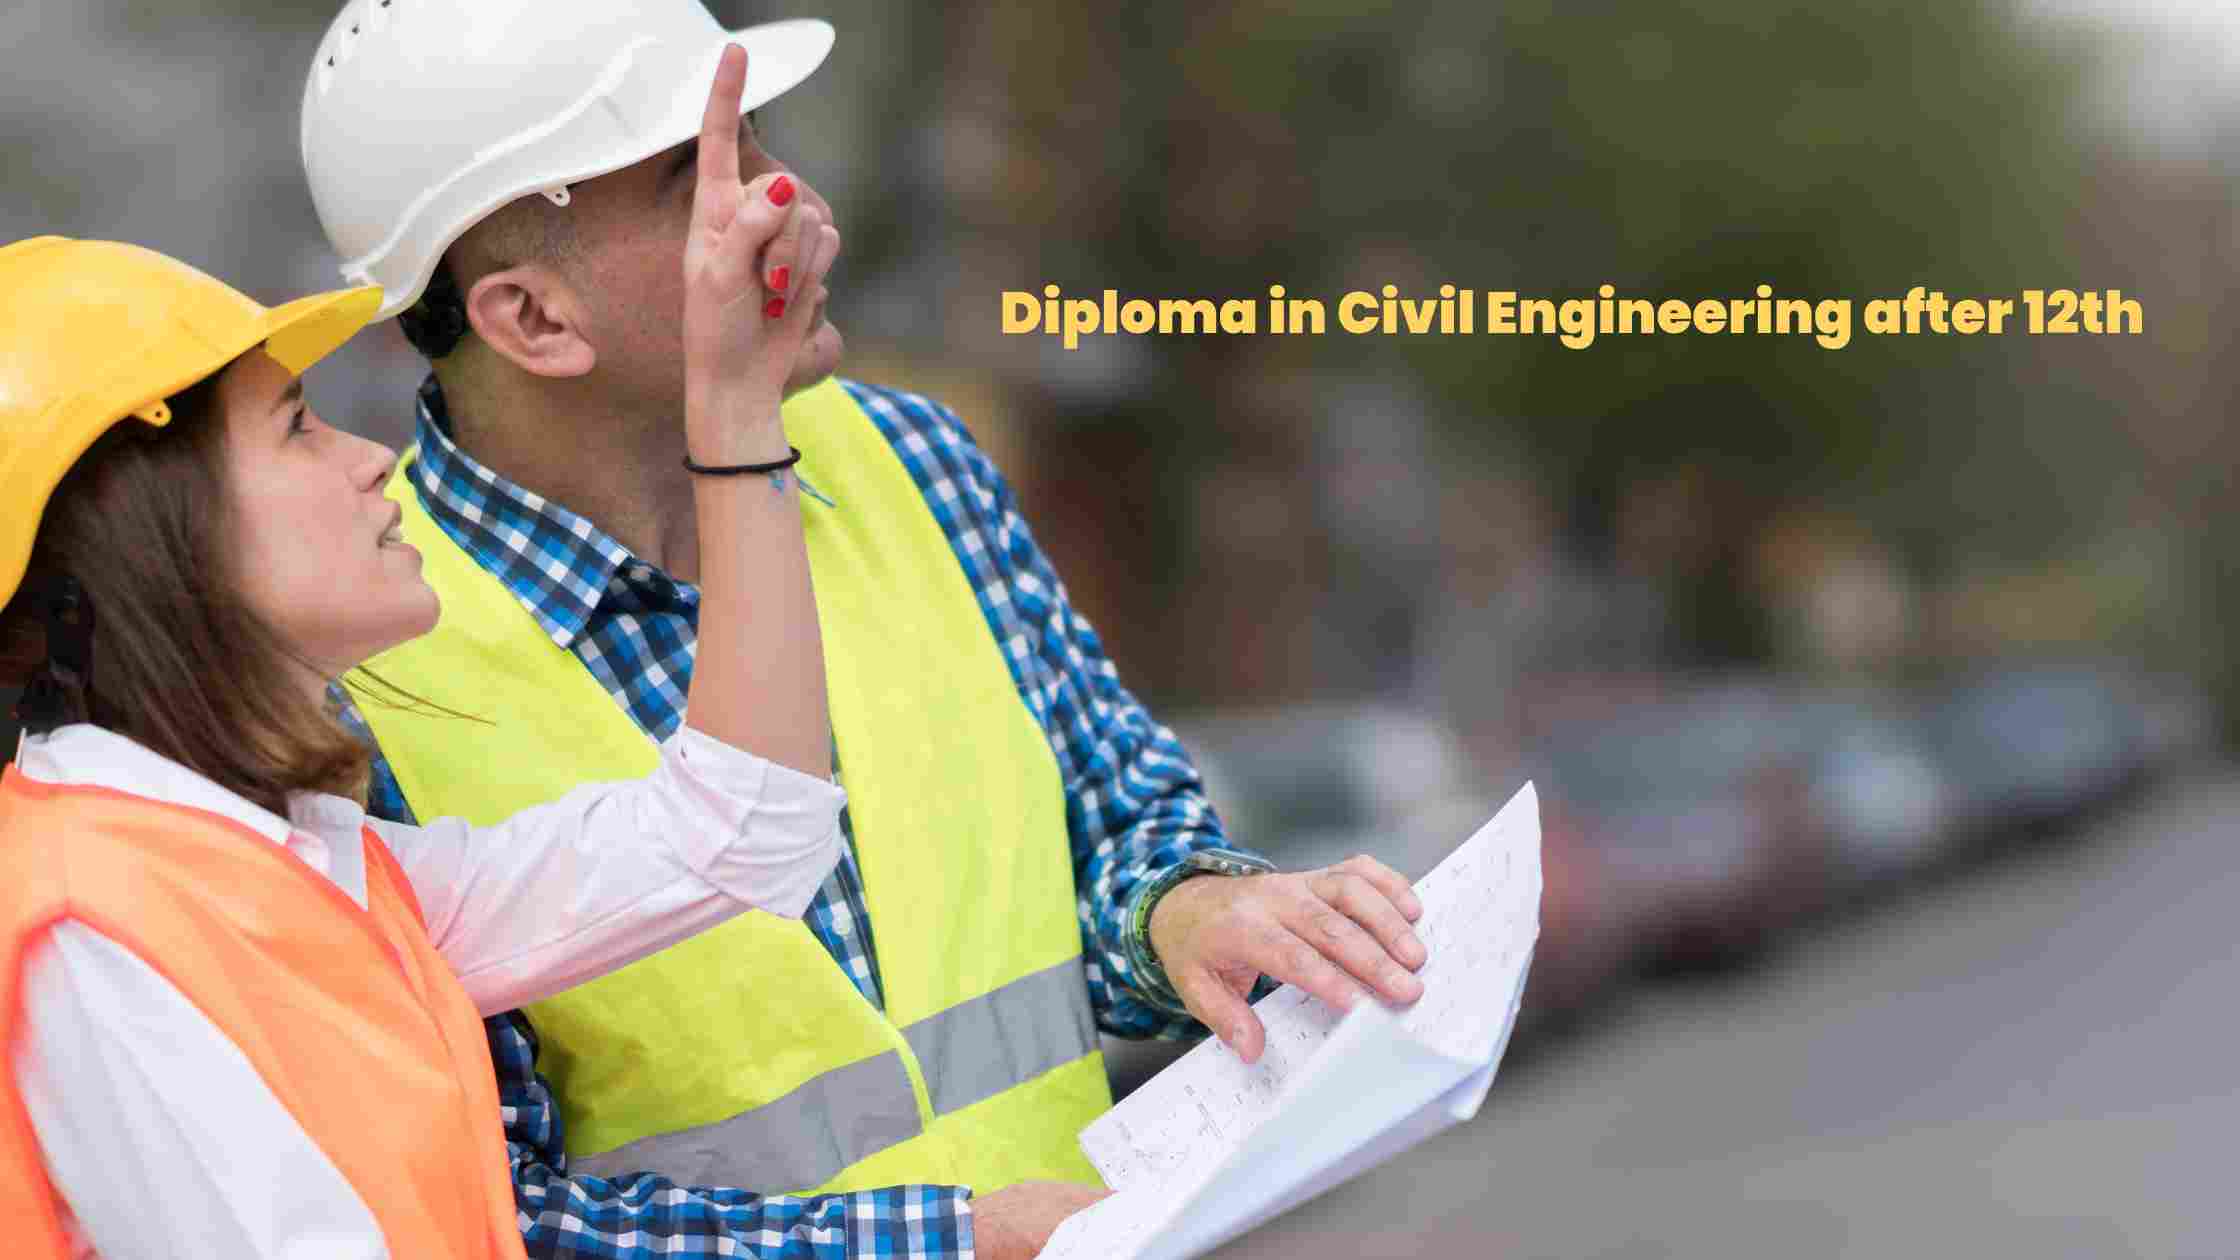 Diploma in Civil Engineering after 12th